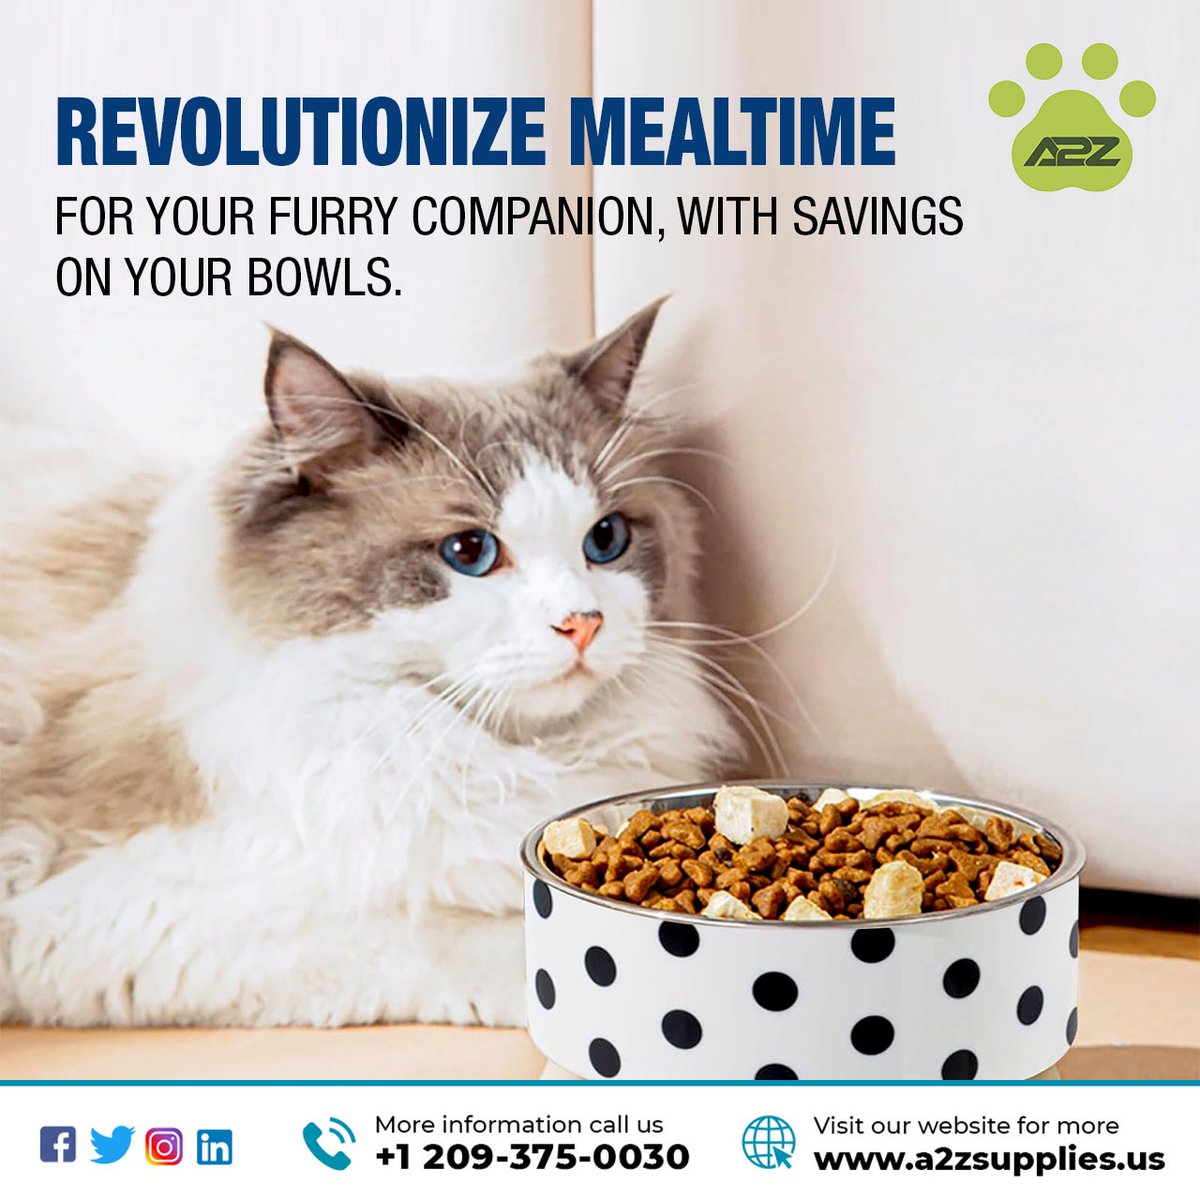 Revolutionize mealtime for your furry companion, with savings on your bowls.

#bowlingtime #petfood #petcare #petessentials #petsofinstagram